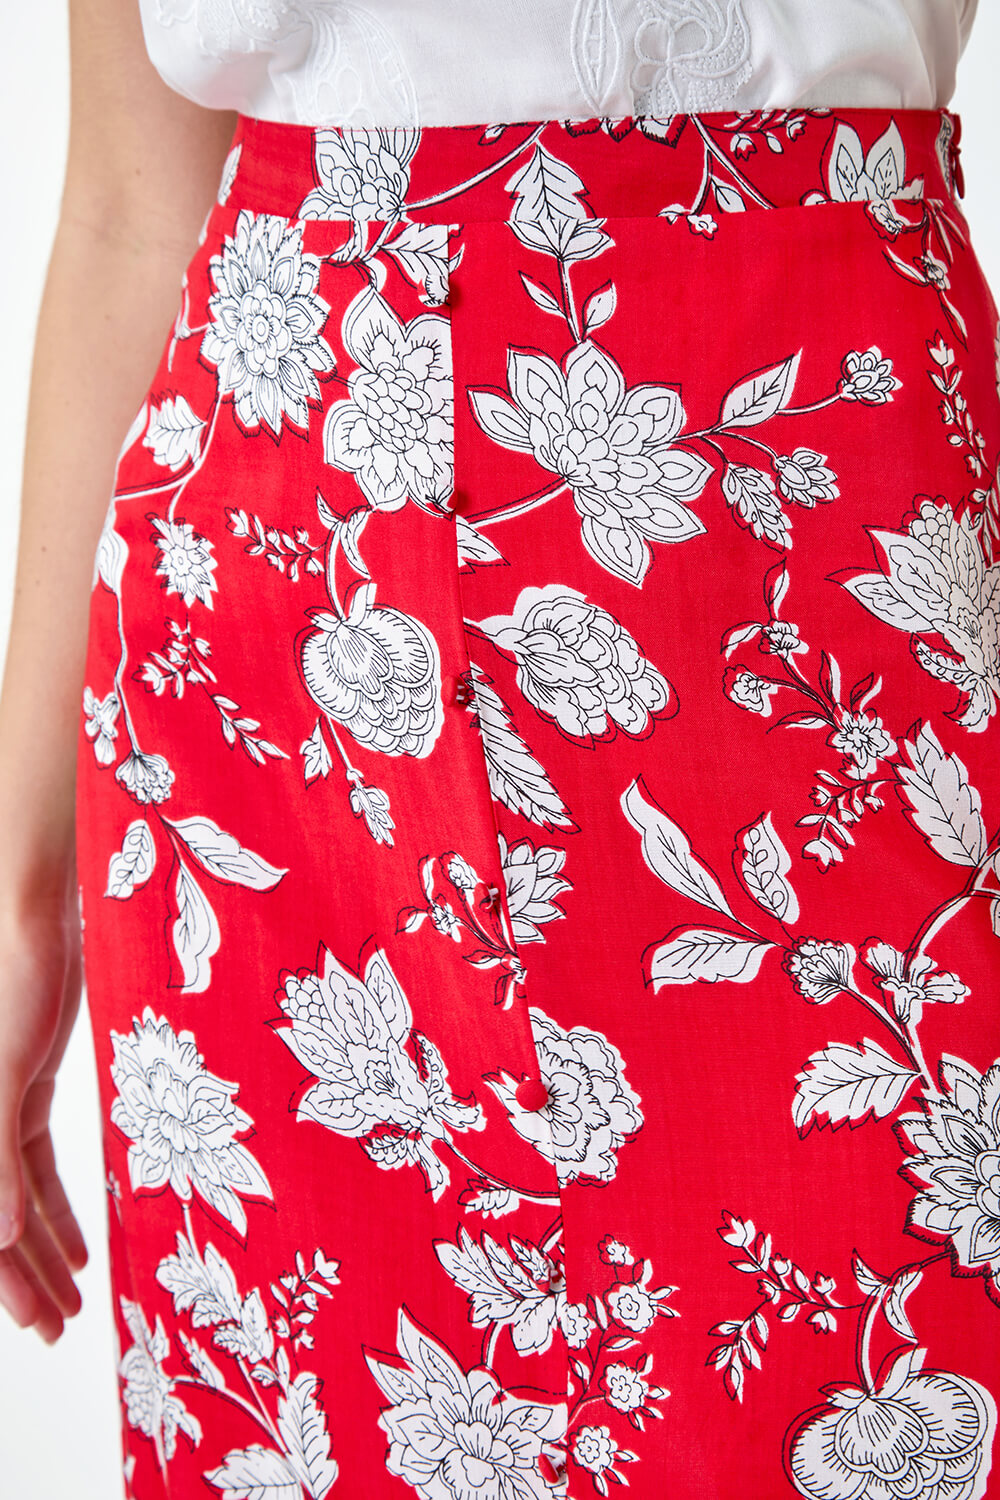 CORAL Floral Button Detail Midi Skirt, Image 5 of 5